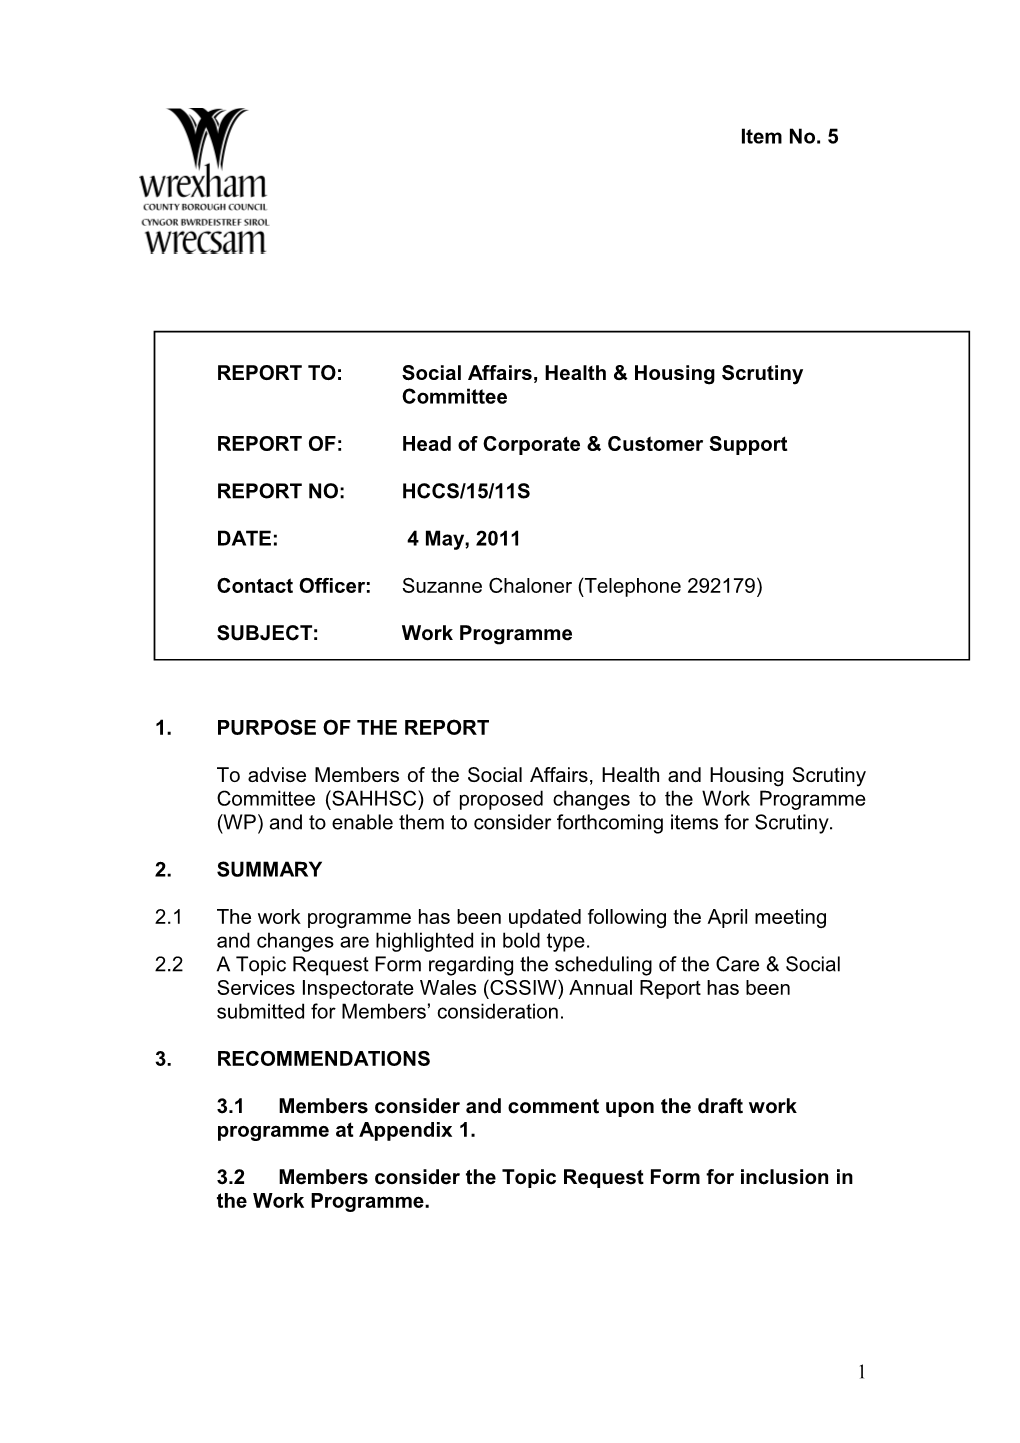 REPORT TO: Social Affairs, Health & Housing Scrutiny Committee